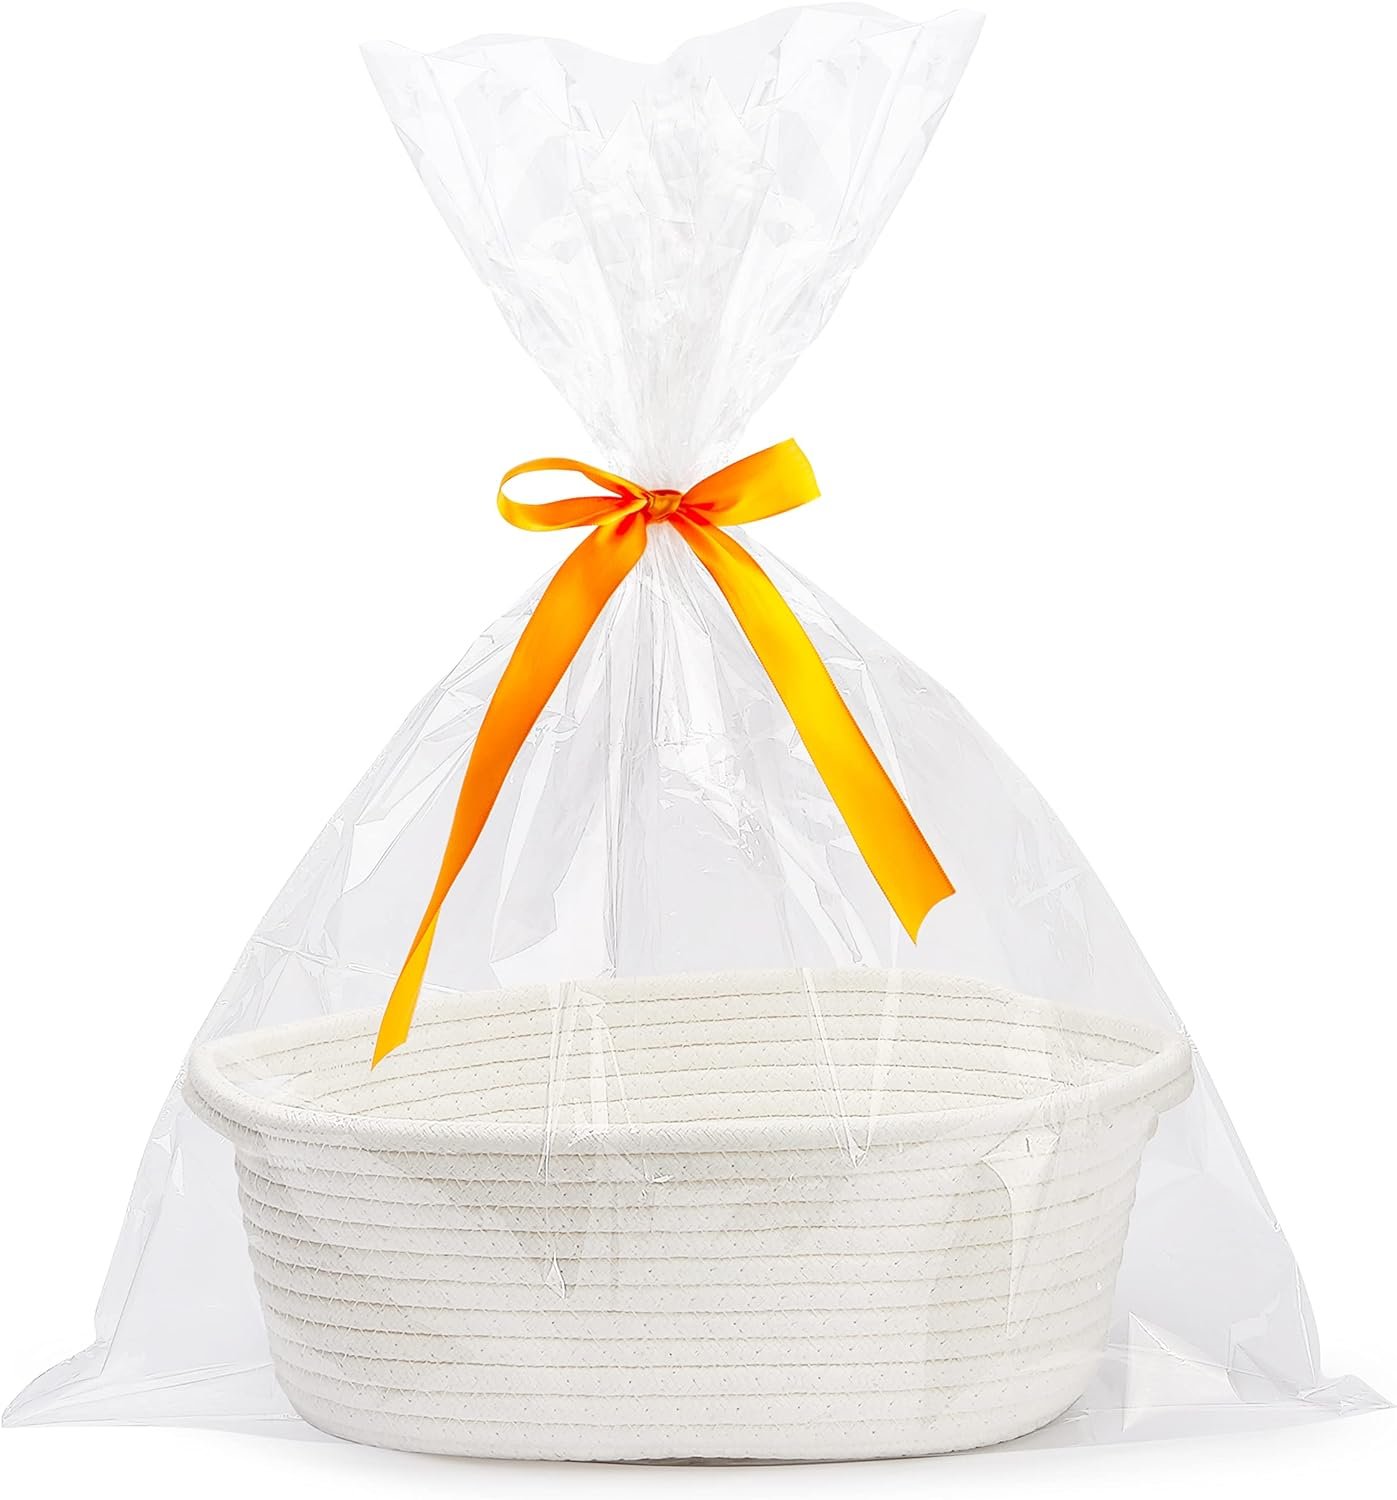 Pro Goleem Small Woven Basket with Gift Bags and Ribbons Durable Baskets for Halloween Gifts Empty Small Rope Basket for Storage 12X 8 X 5 Baby Toy Basket with Handles, White